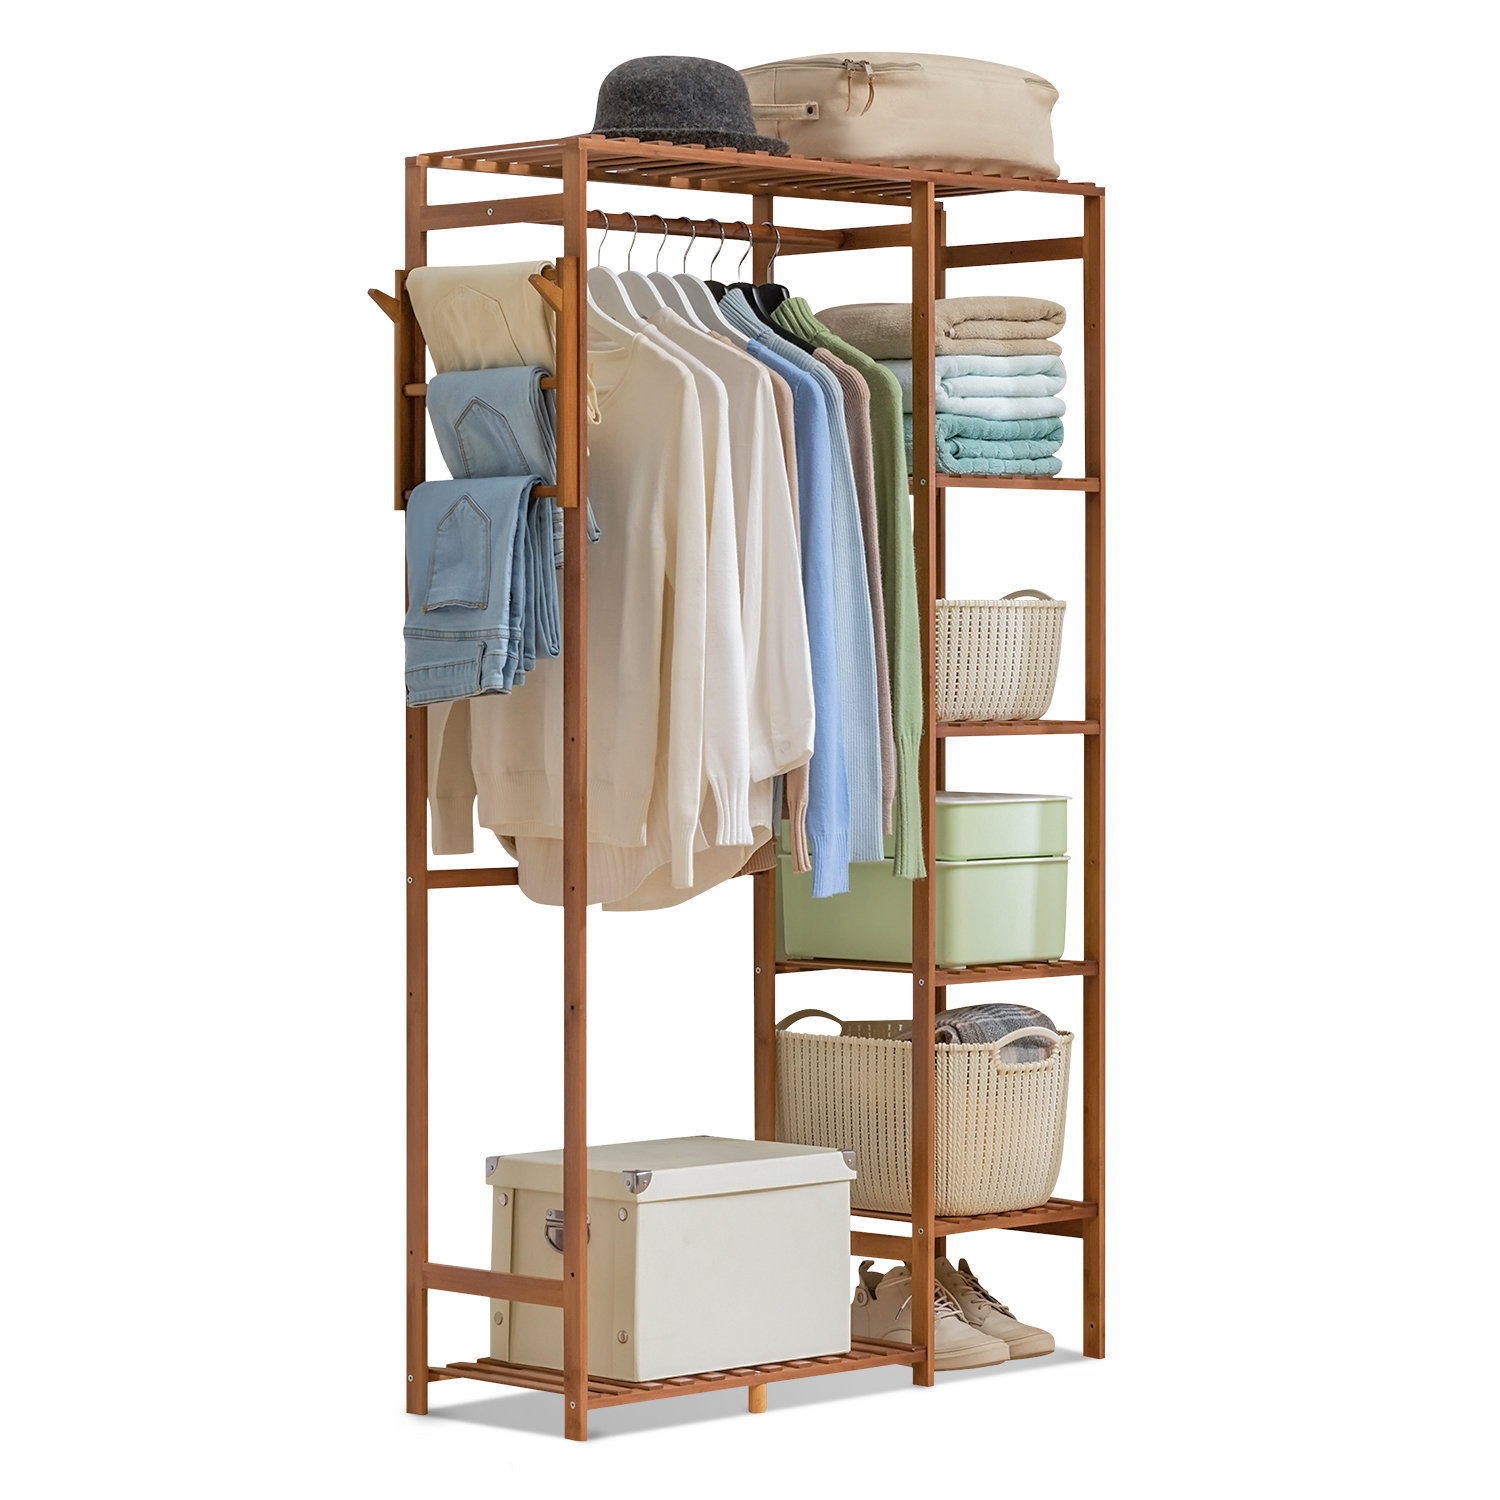 MoNiBloom Heavy Duty Clothes Rack, Clothing Rack for Hanging